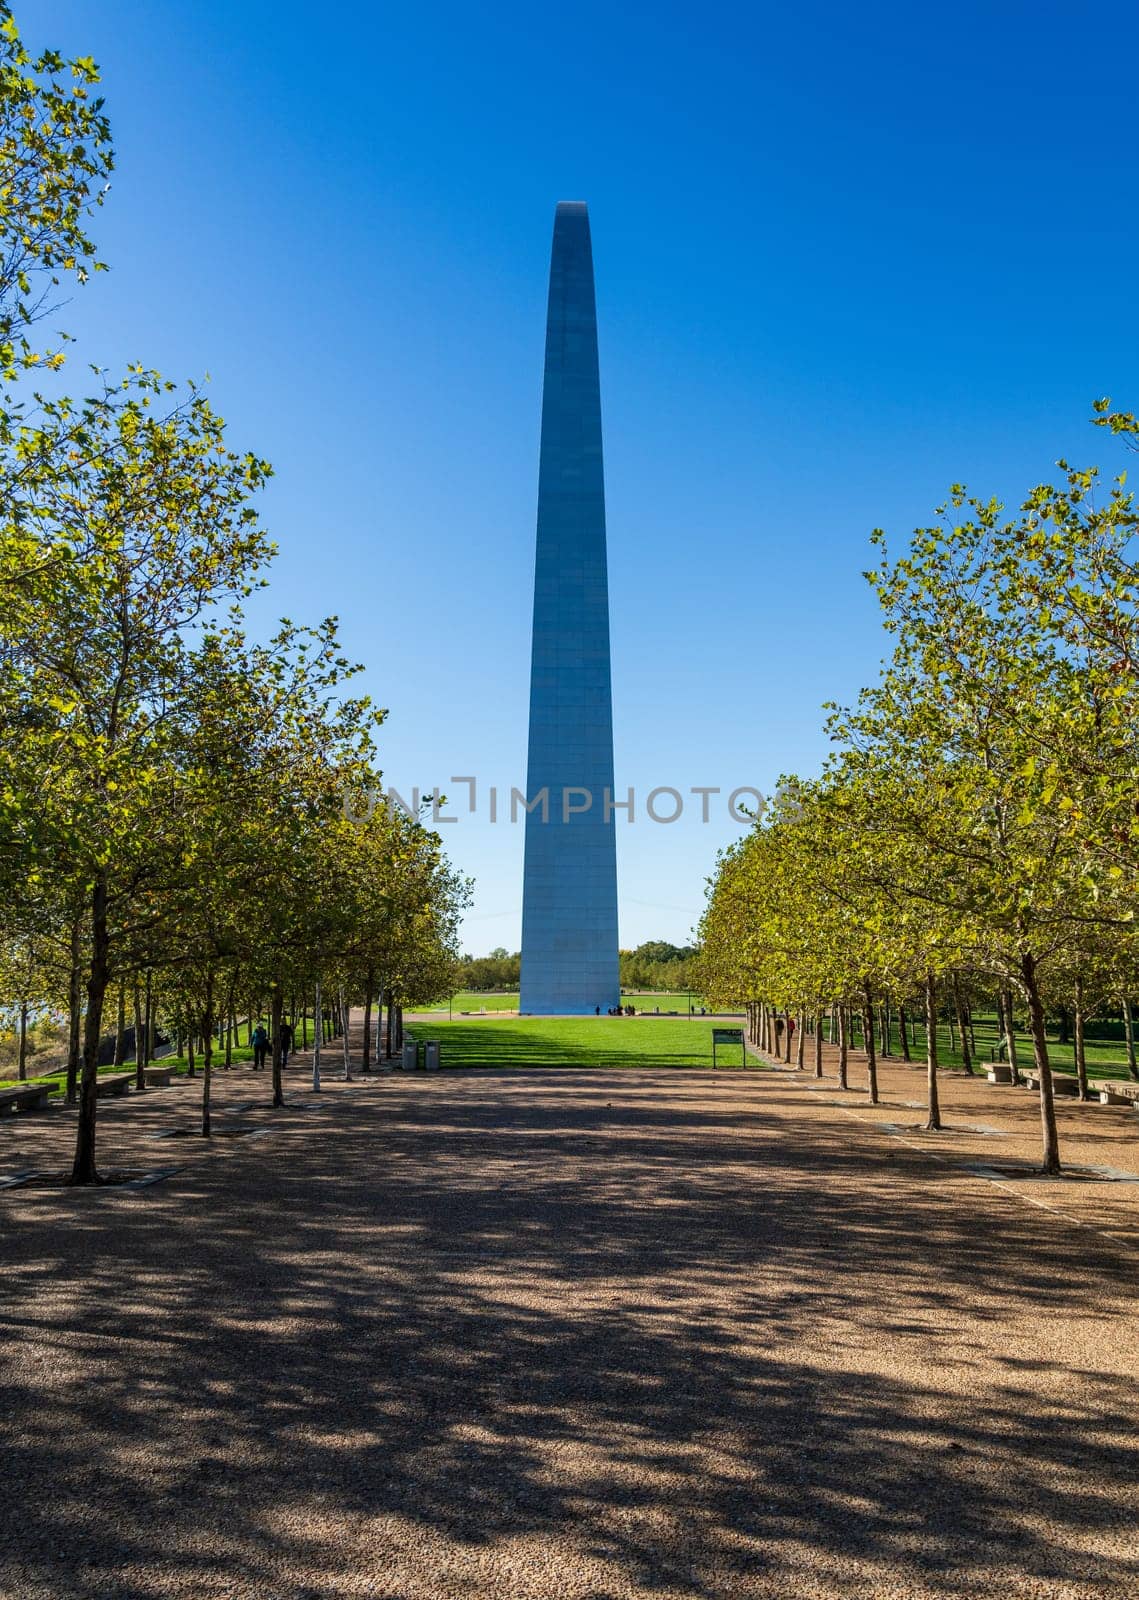 Unusual view of the Gateway arch seen from the national park on riverbank at St Louis Missouri